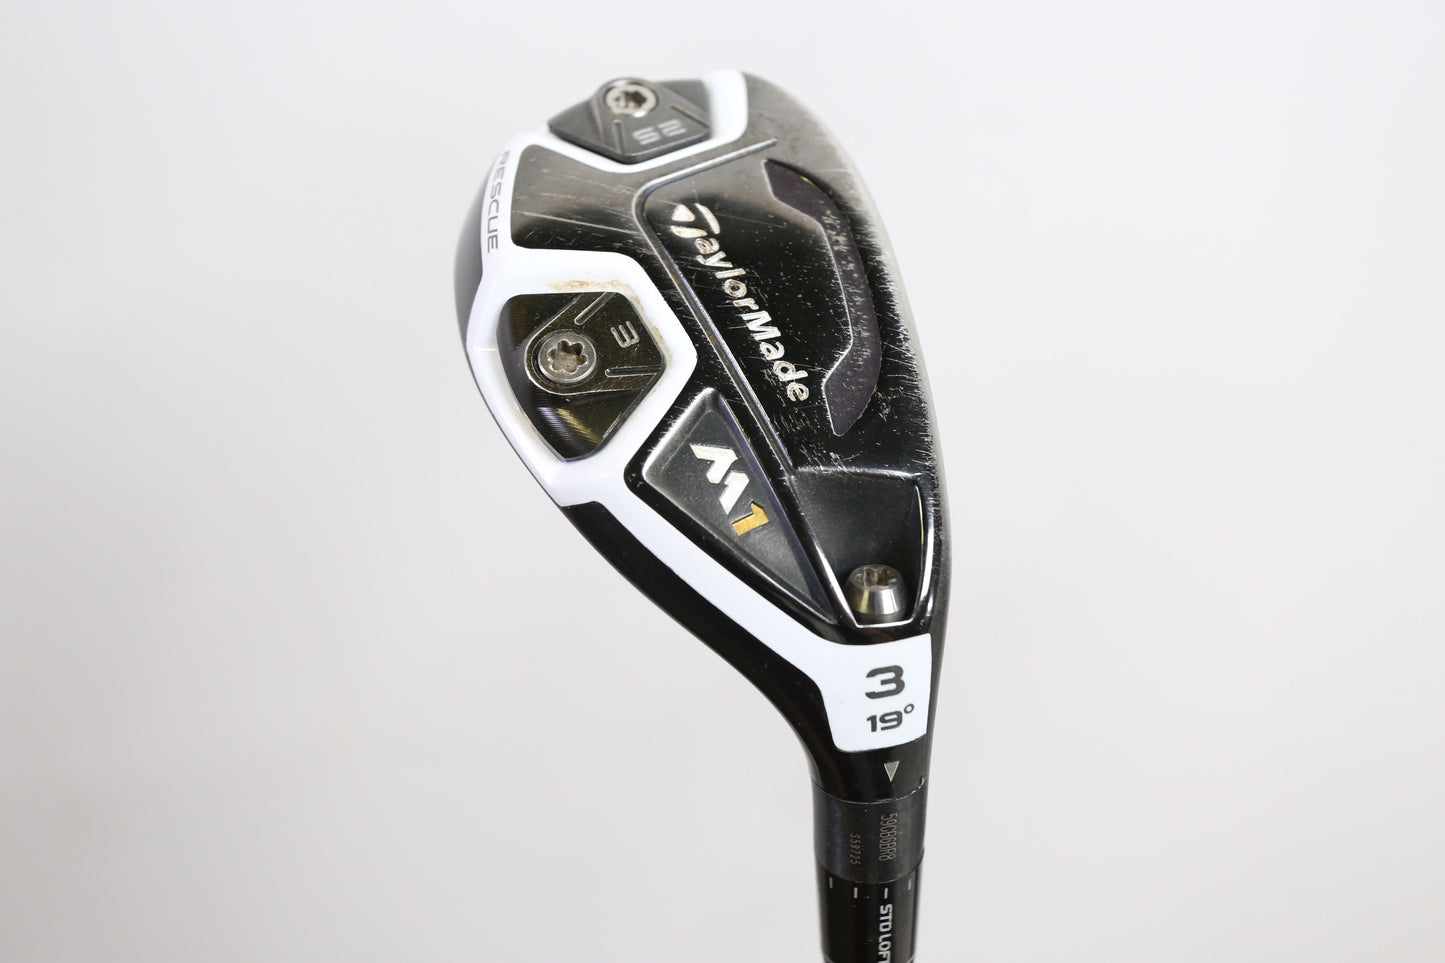 Used TaylorMade M1 Rescue 3H Hybrid - Right-Handed - 19 Degrees - Stiff Flex